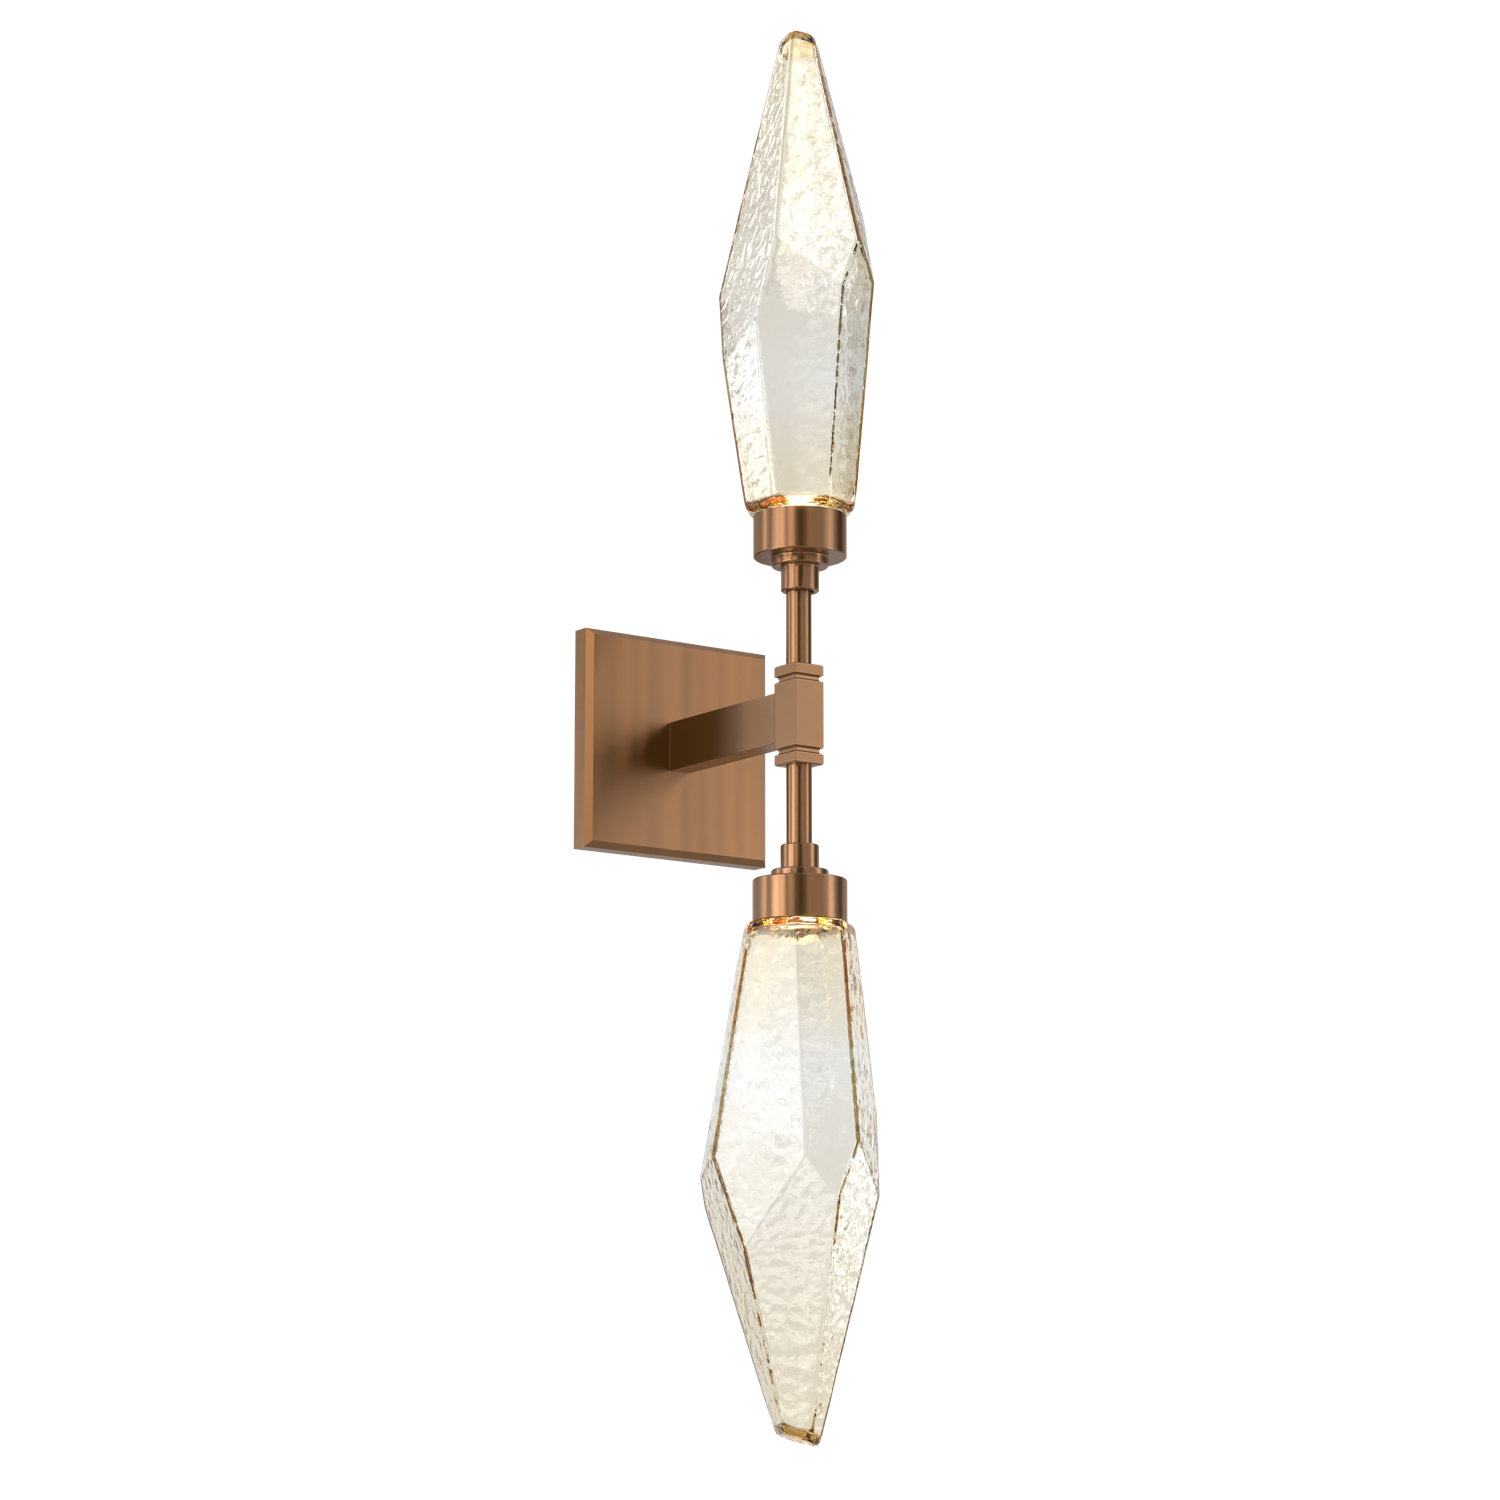 IDB0050-02-RB-CA-Hammerton-Studio-Rock-Crystal-wall-sconce-with-oil-rubbed-bronze-finish-and-chilled-amber-blown-glass-shades-and-LED-lamping